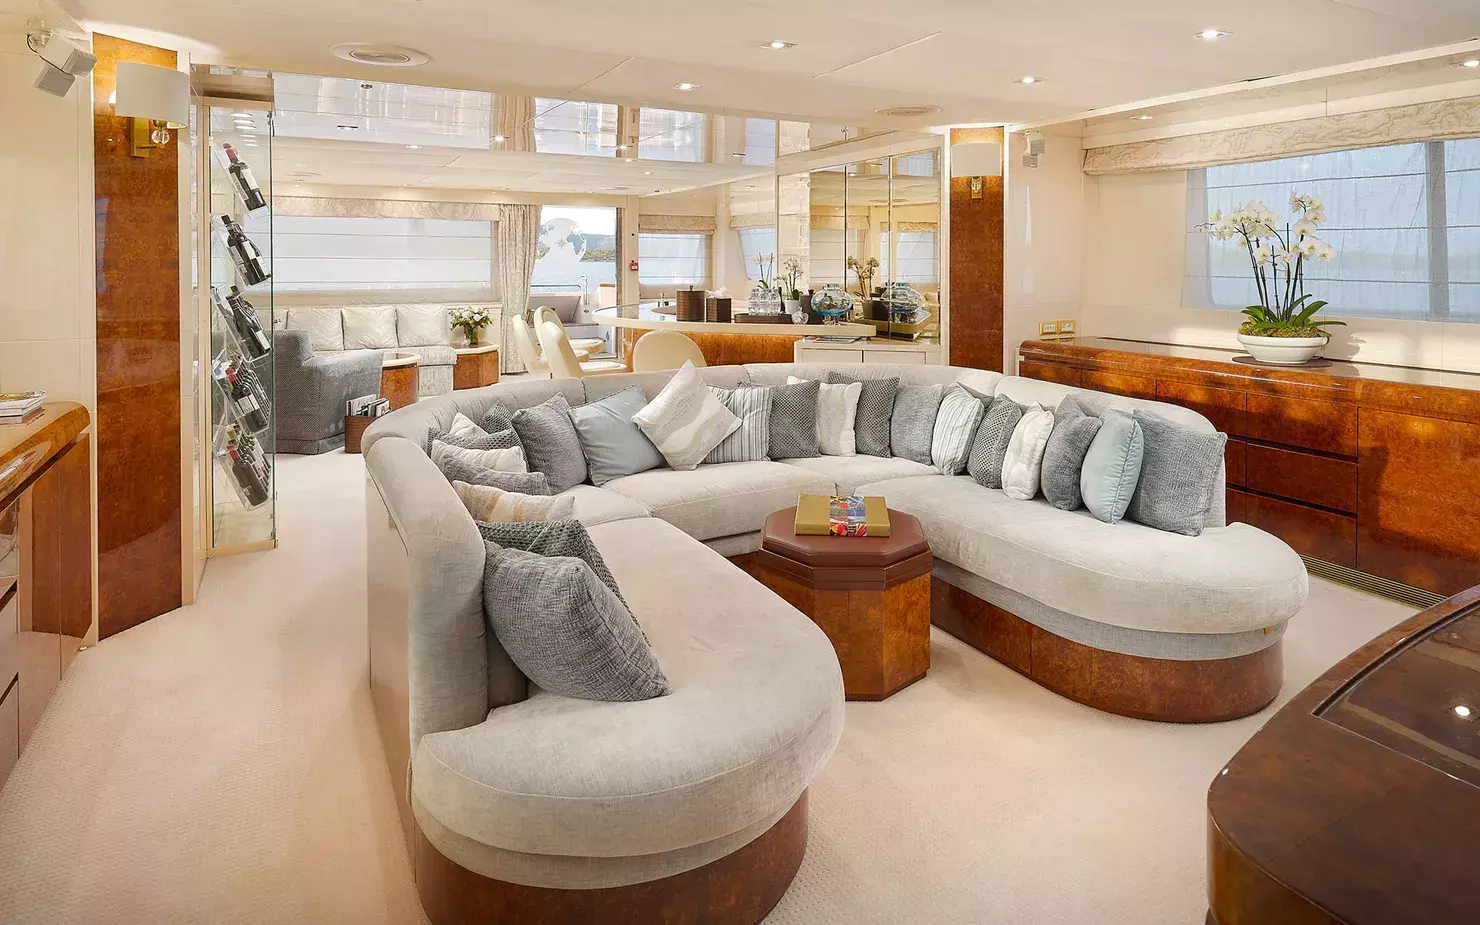 Ladyship by Heesen - Top rates for a Charter of a private Superyacht in Greece